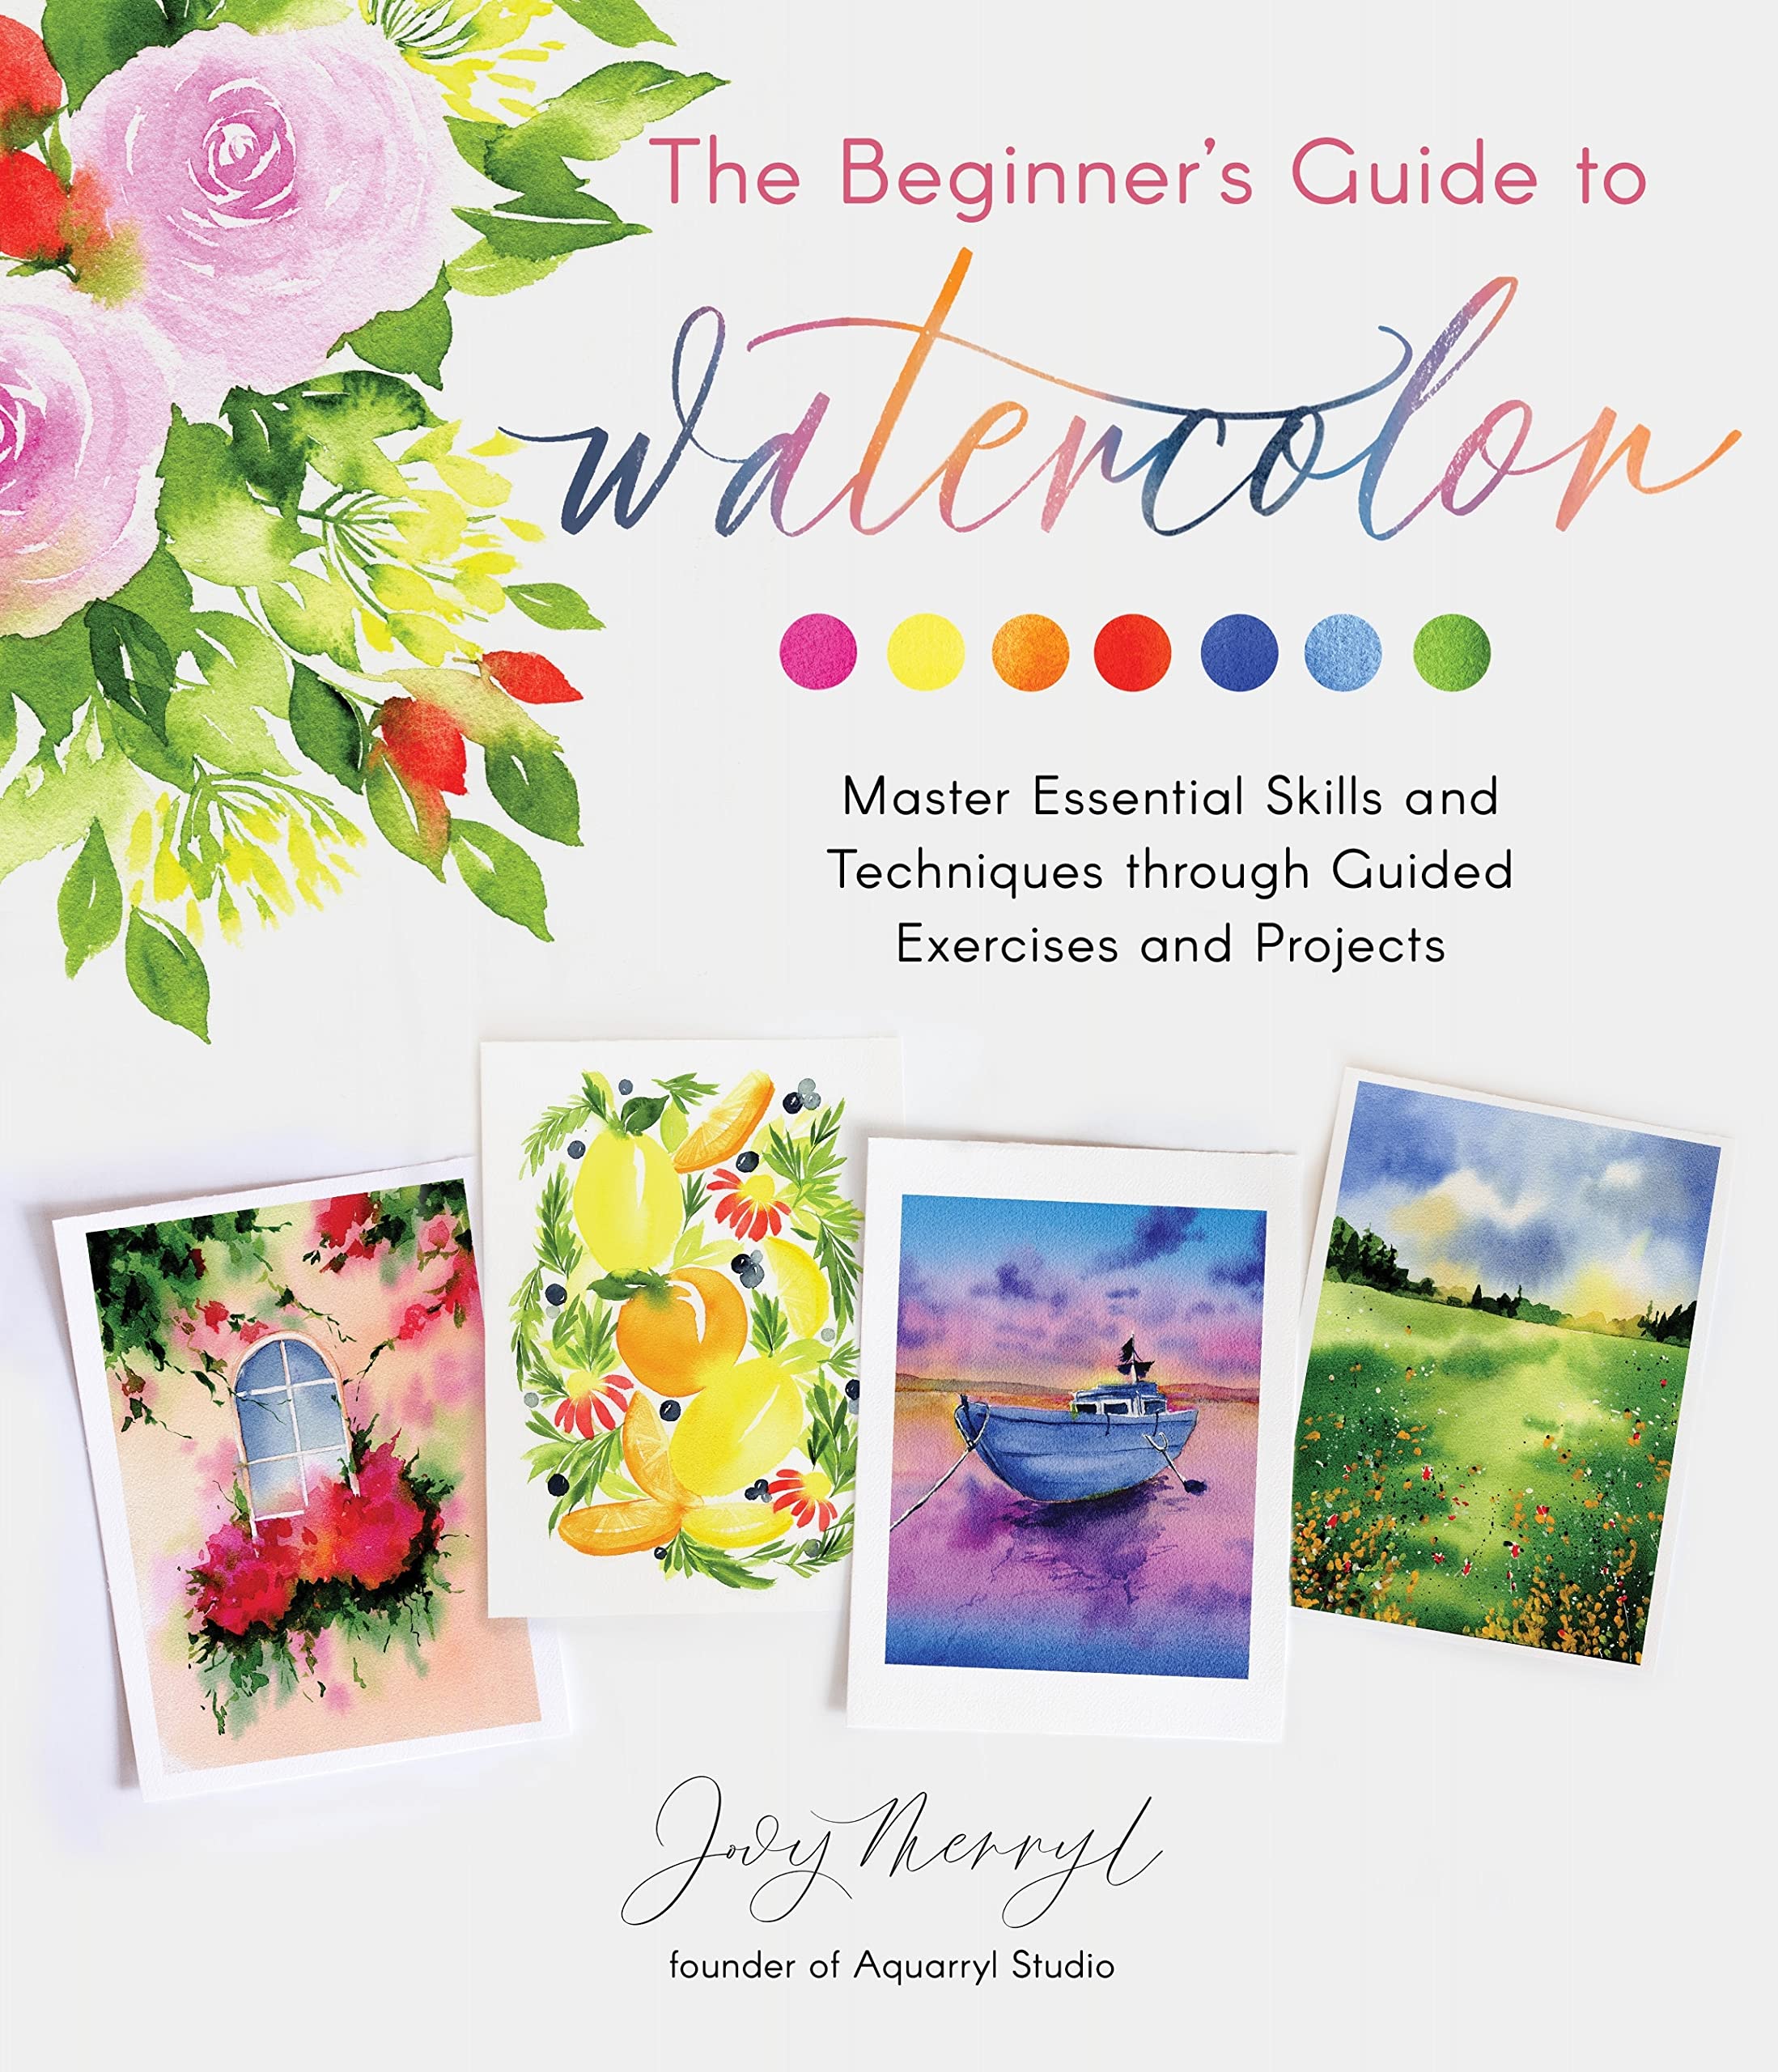 Image for "The Beginner's Guide to Watercolor"